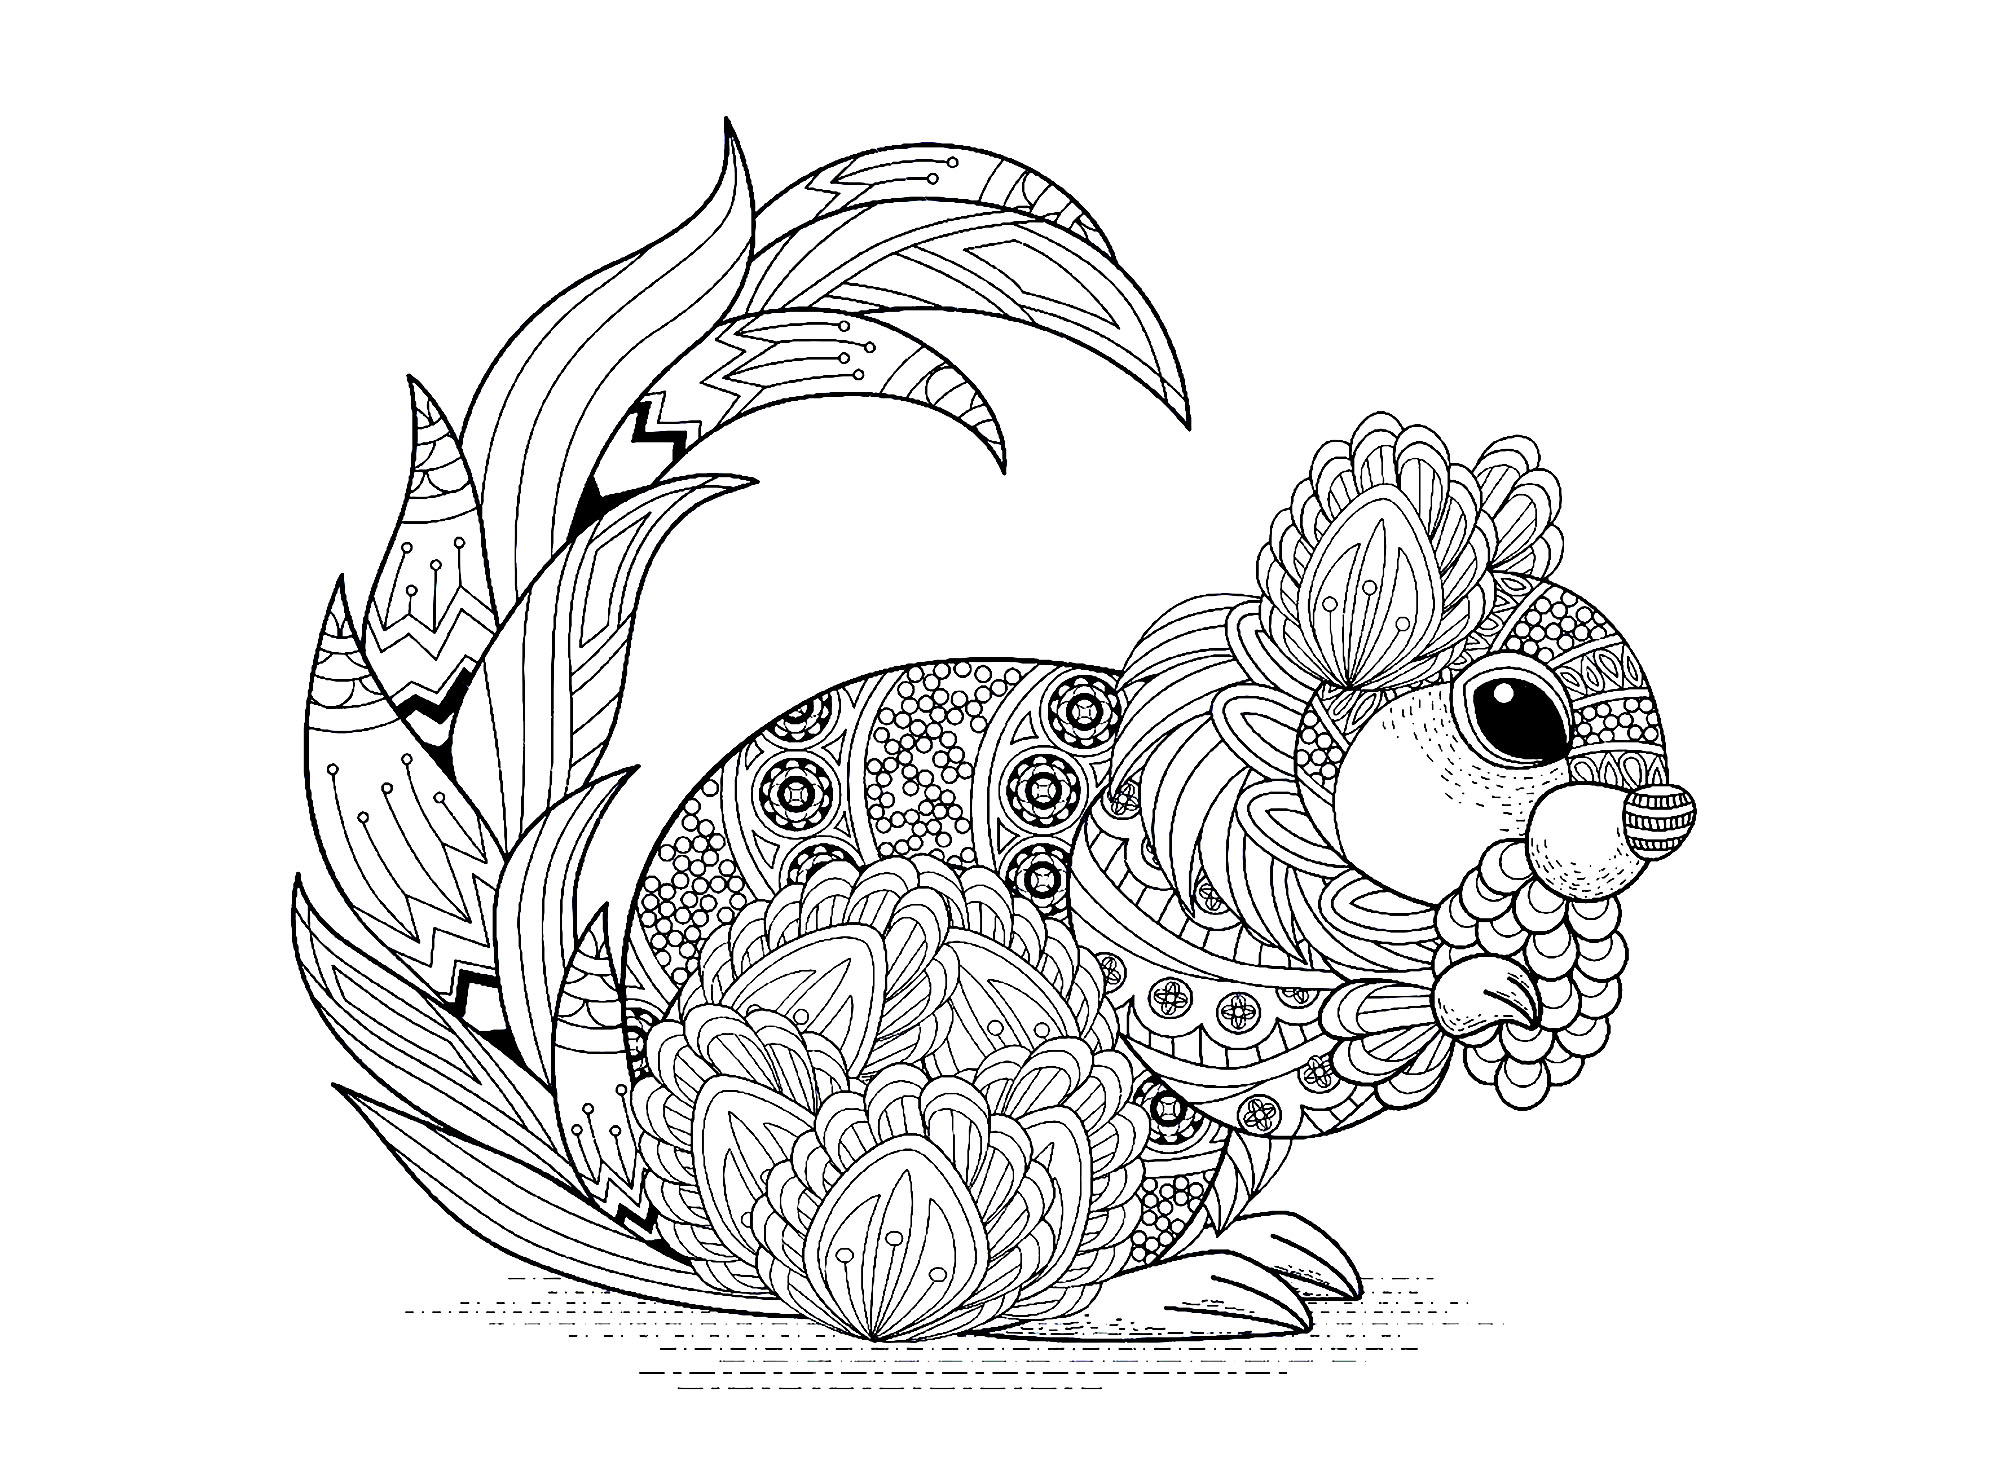 Squirrel with patterns - Squirrels & Rodents Adult Coloring Pages